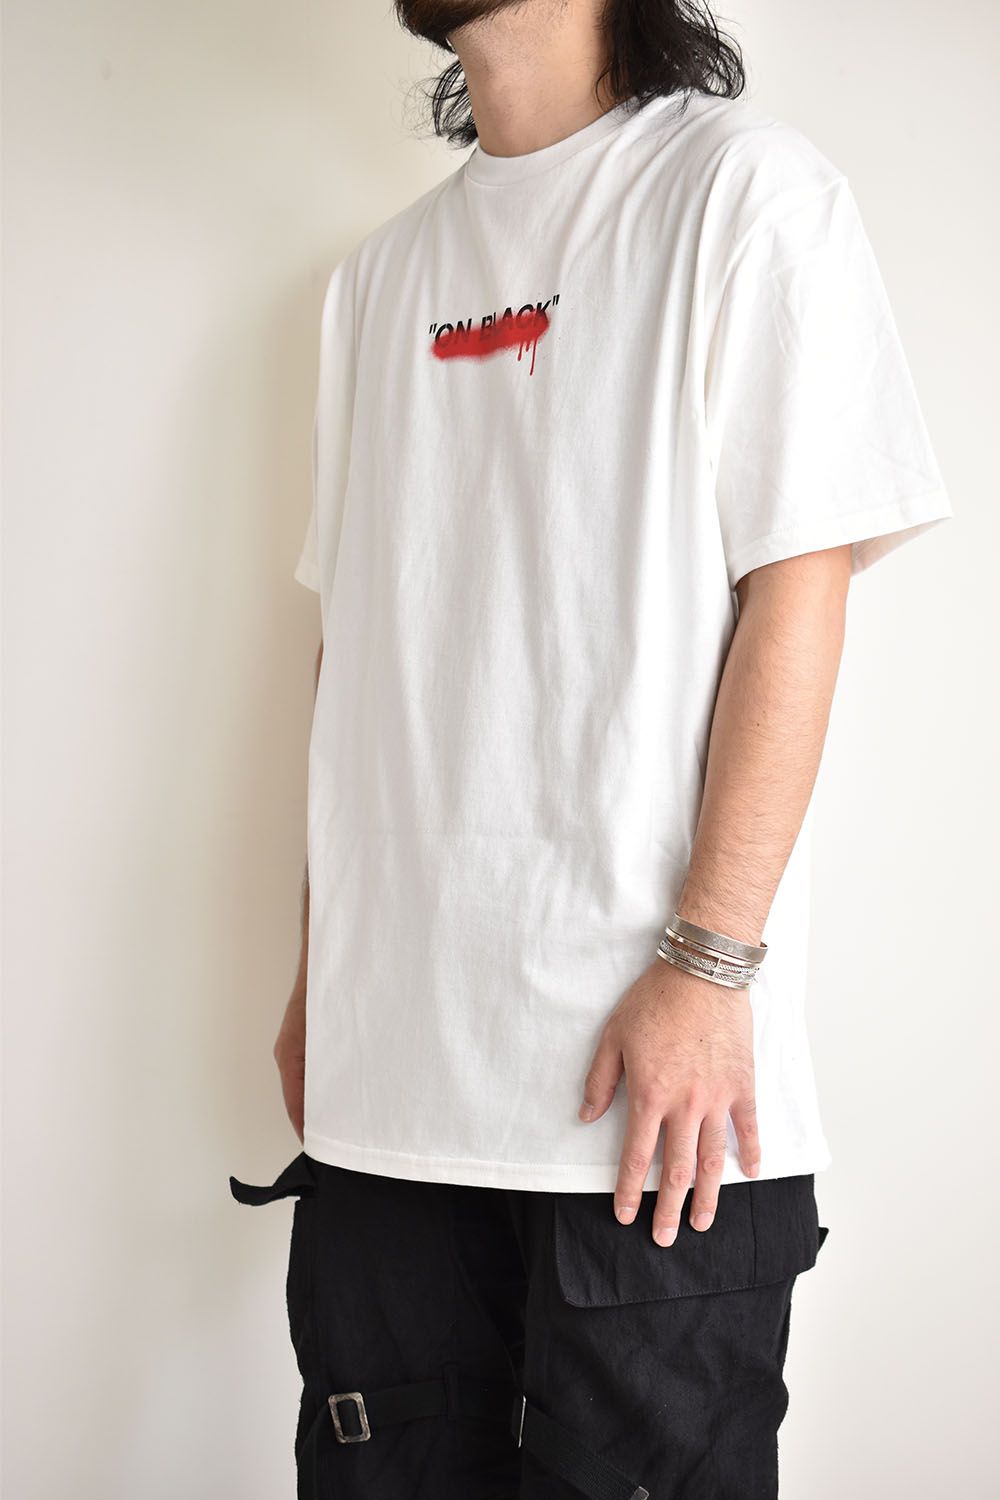 《ON BLACK》Print Tee"White×Red"/プリントTee"ホワイト×レッド"